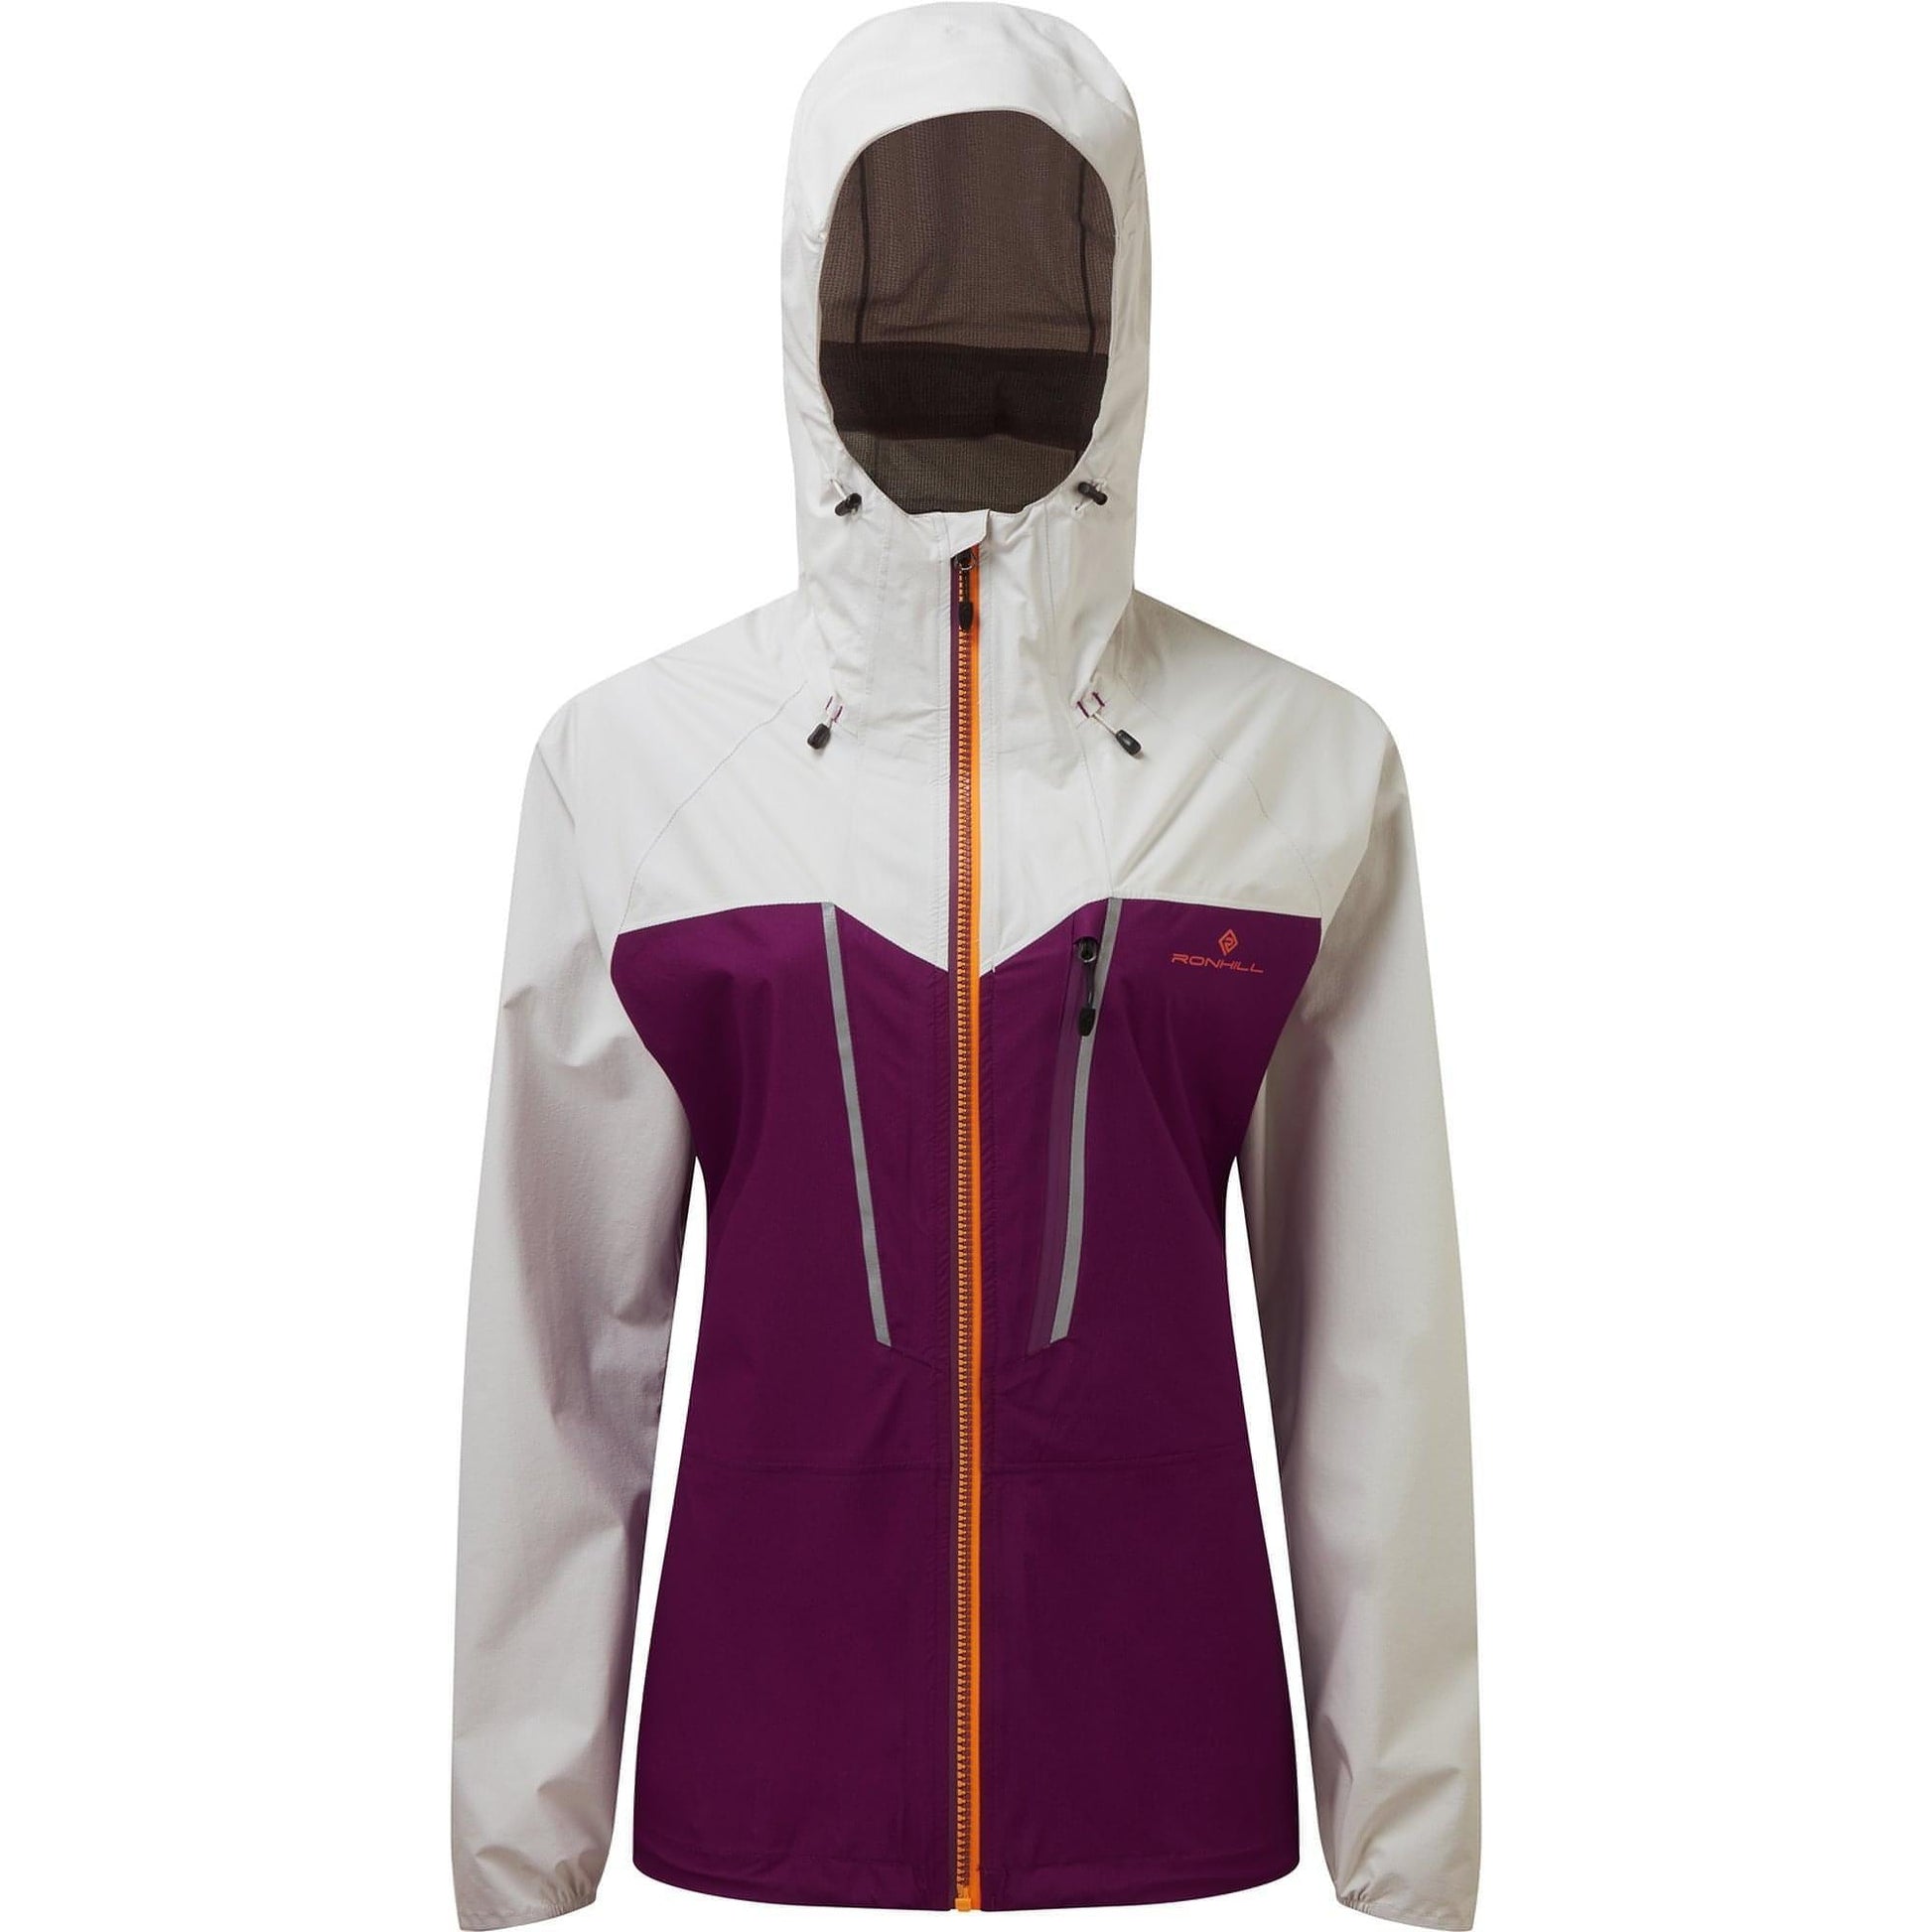 Ronhill Tech Fortify Jacket